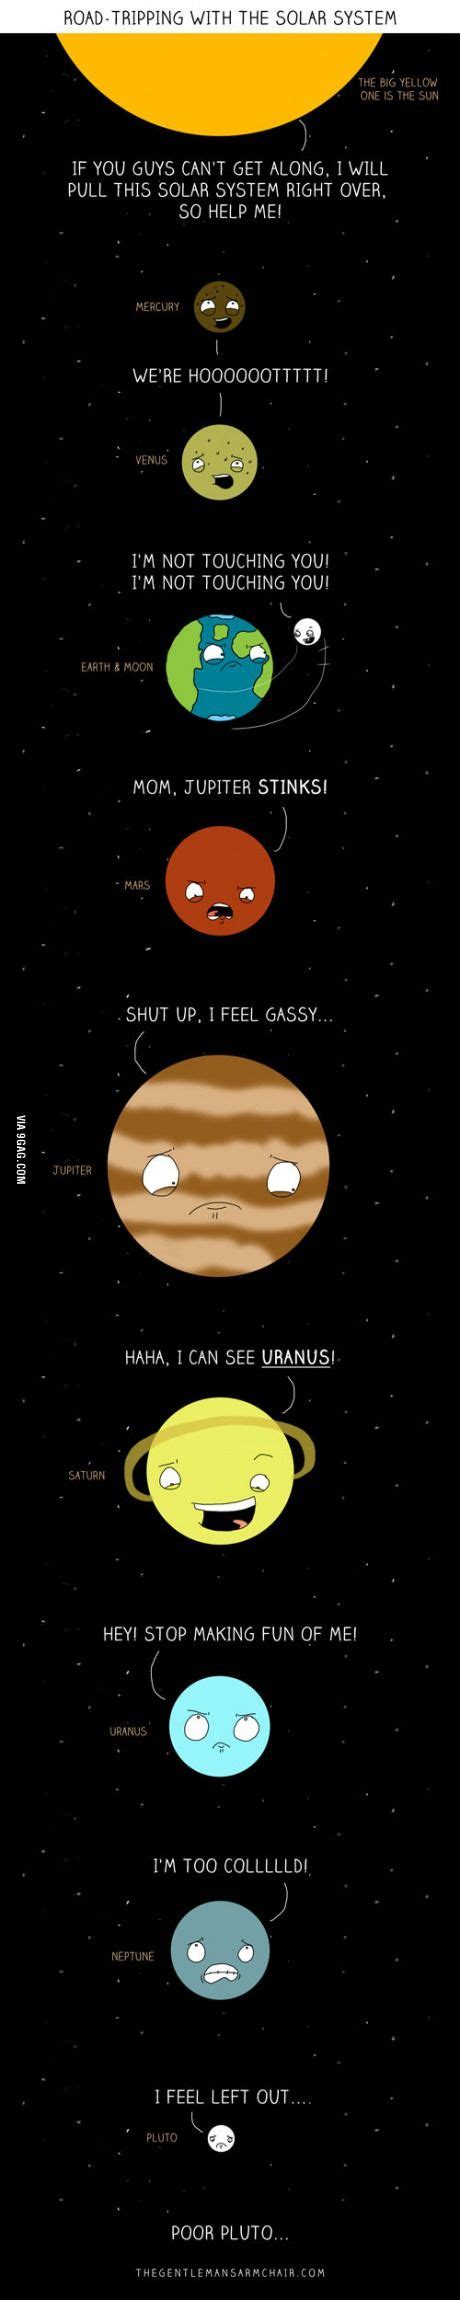 Road Tripping With The Solar System Funny Pictures Funny Funny Memes